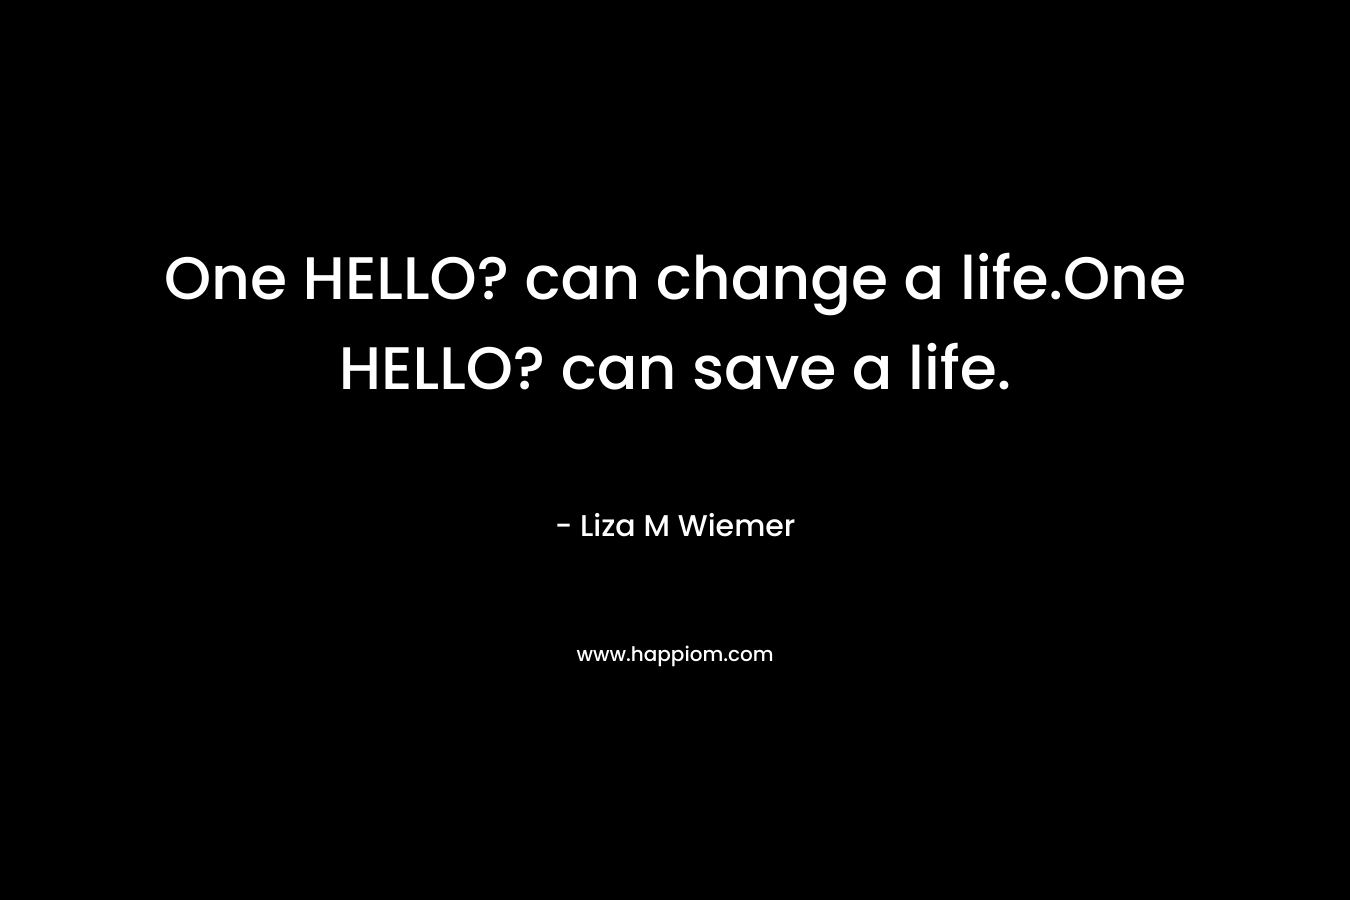 One HELLO? can change a life.One HELLO? can save a life.